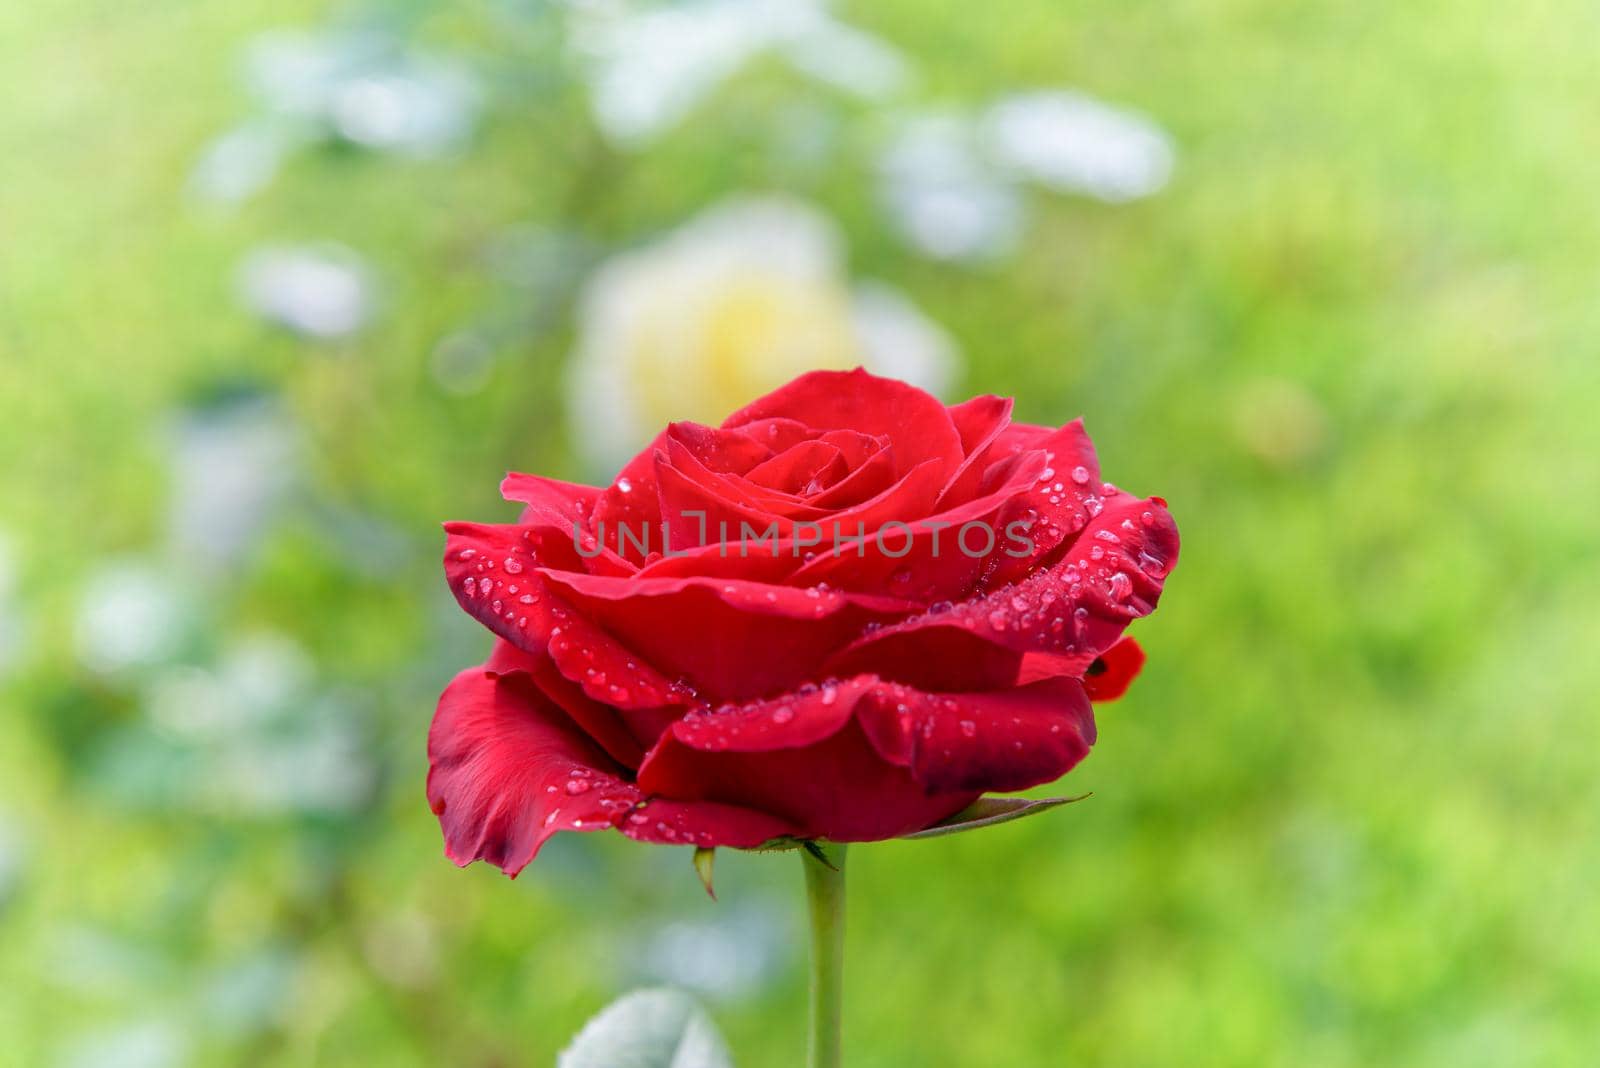 Beautiful nature of the flower garden, close-up red rose blooming on the branch under the bright sunlight and the green garden is the background